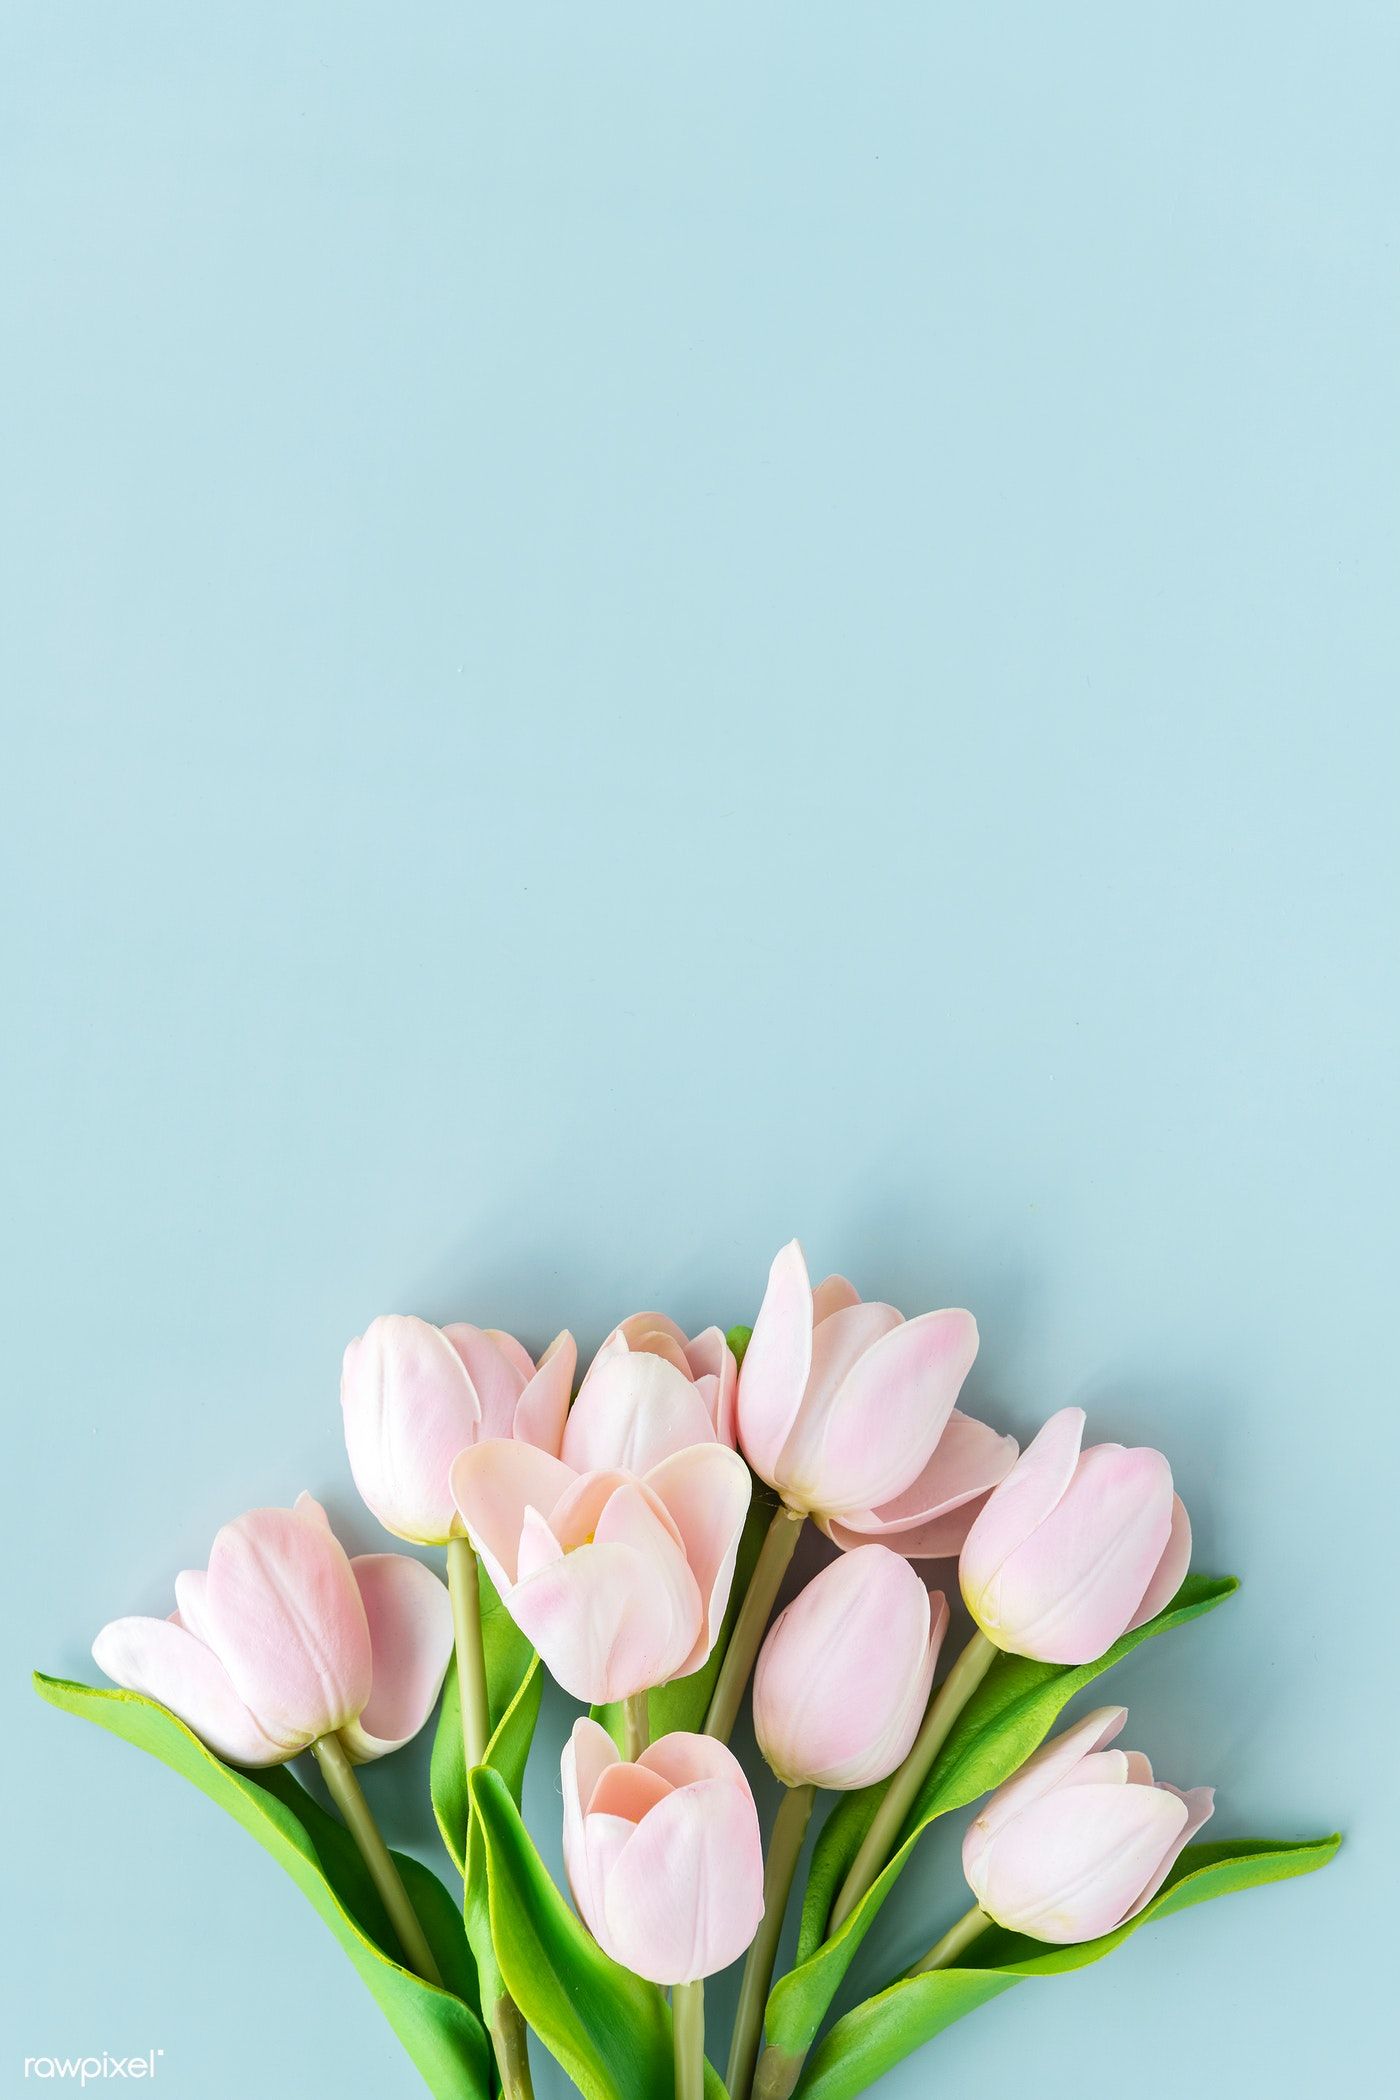 Pink Tulip On Blank Blue Background Template Premium Image By